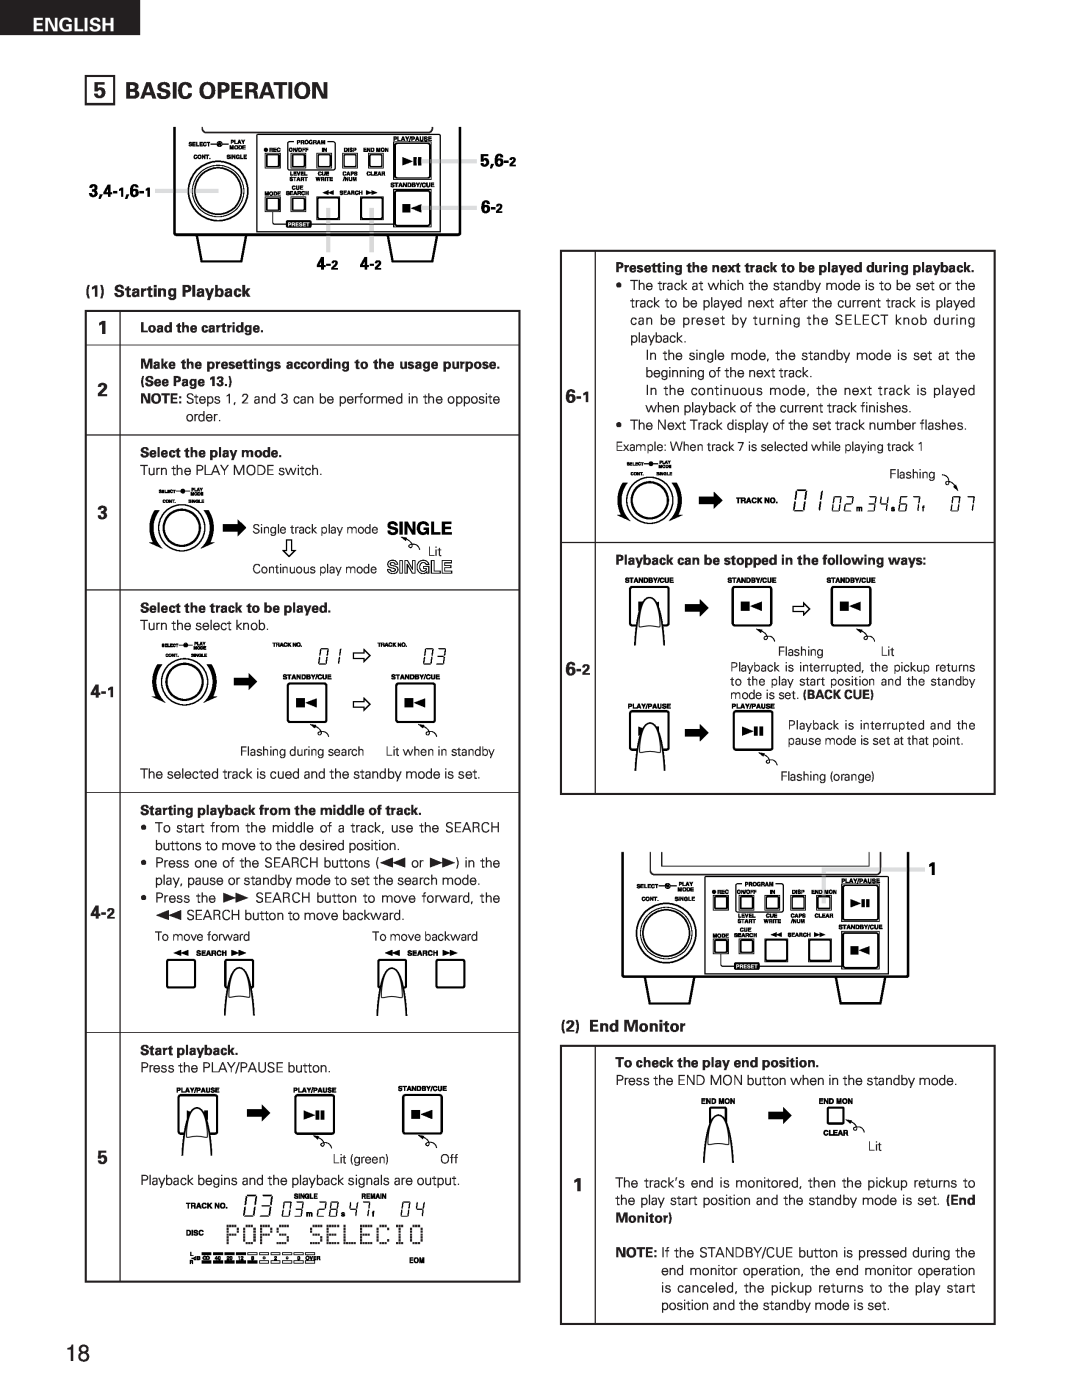 Denon DN-M991R operating instructions Basic Operation, English, Starting Playback, End Monitor 